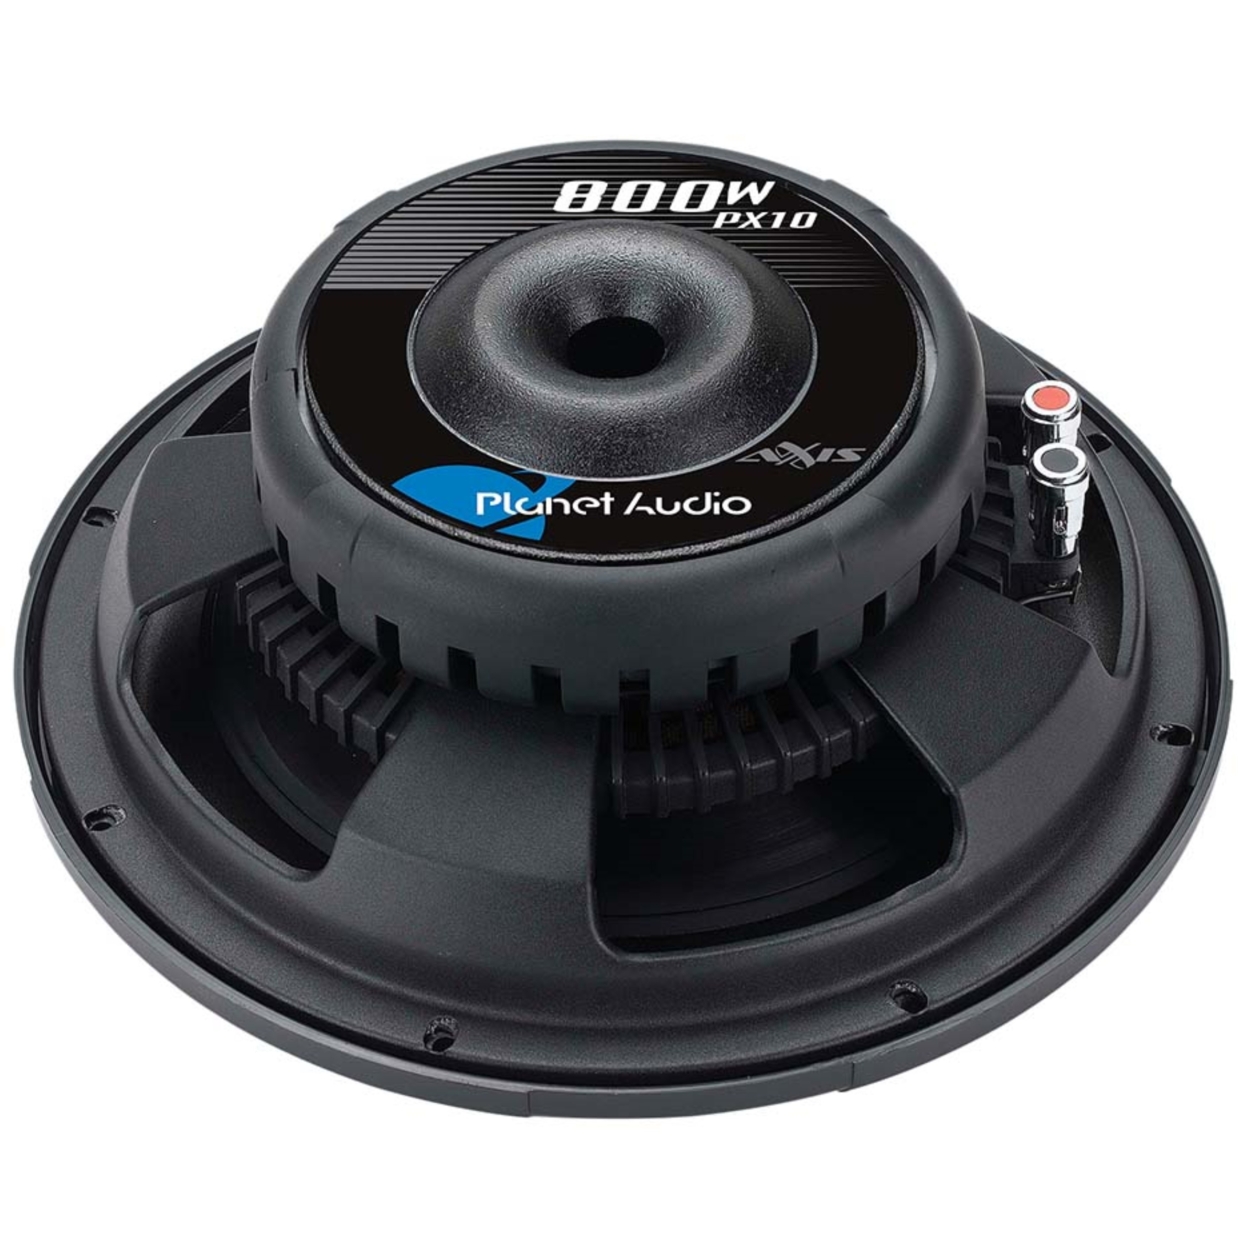 Planet Audio AXIS PX10 , 10 Inch 800W Single 4 Ohm Shallow Slim Subwoofer 10 S4